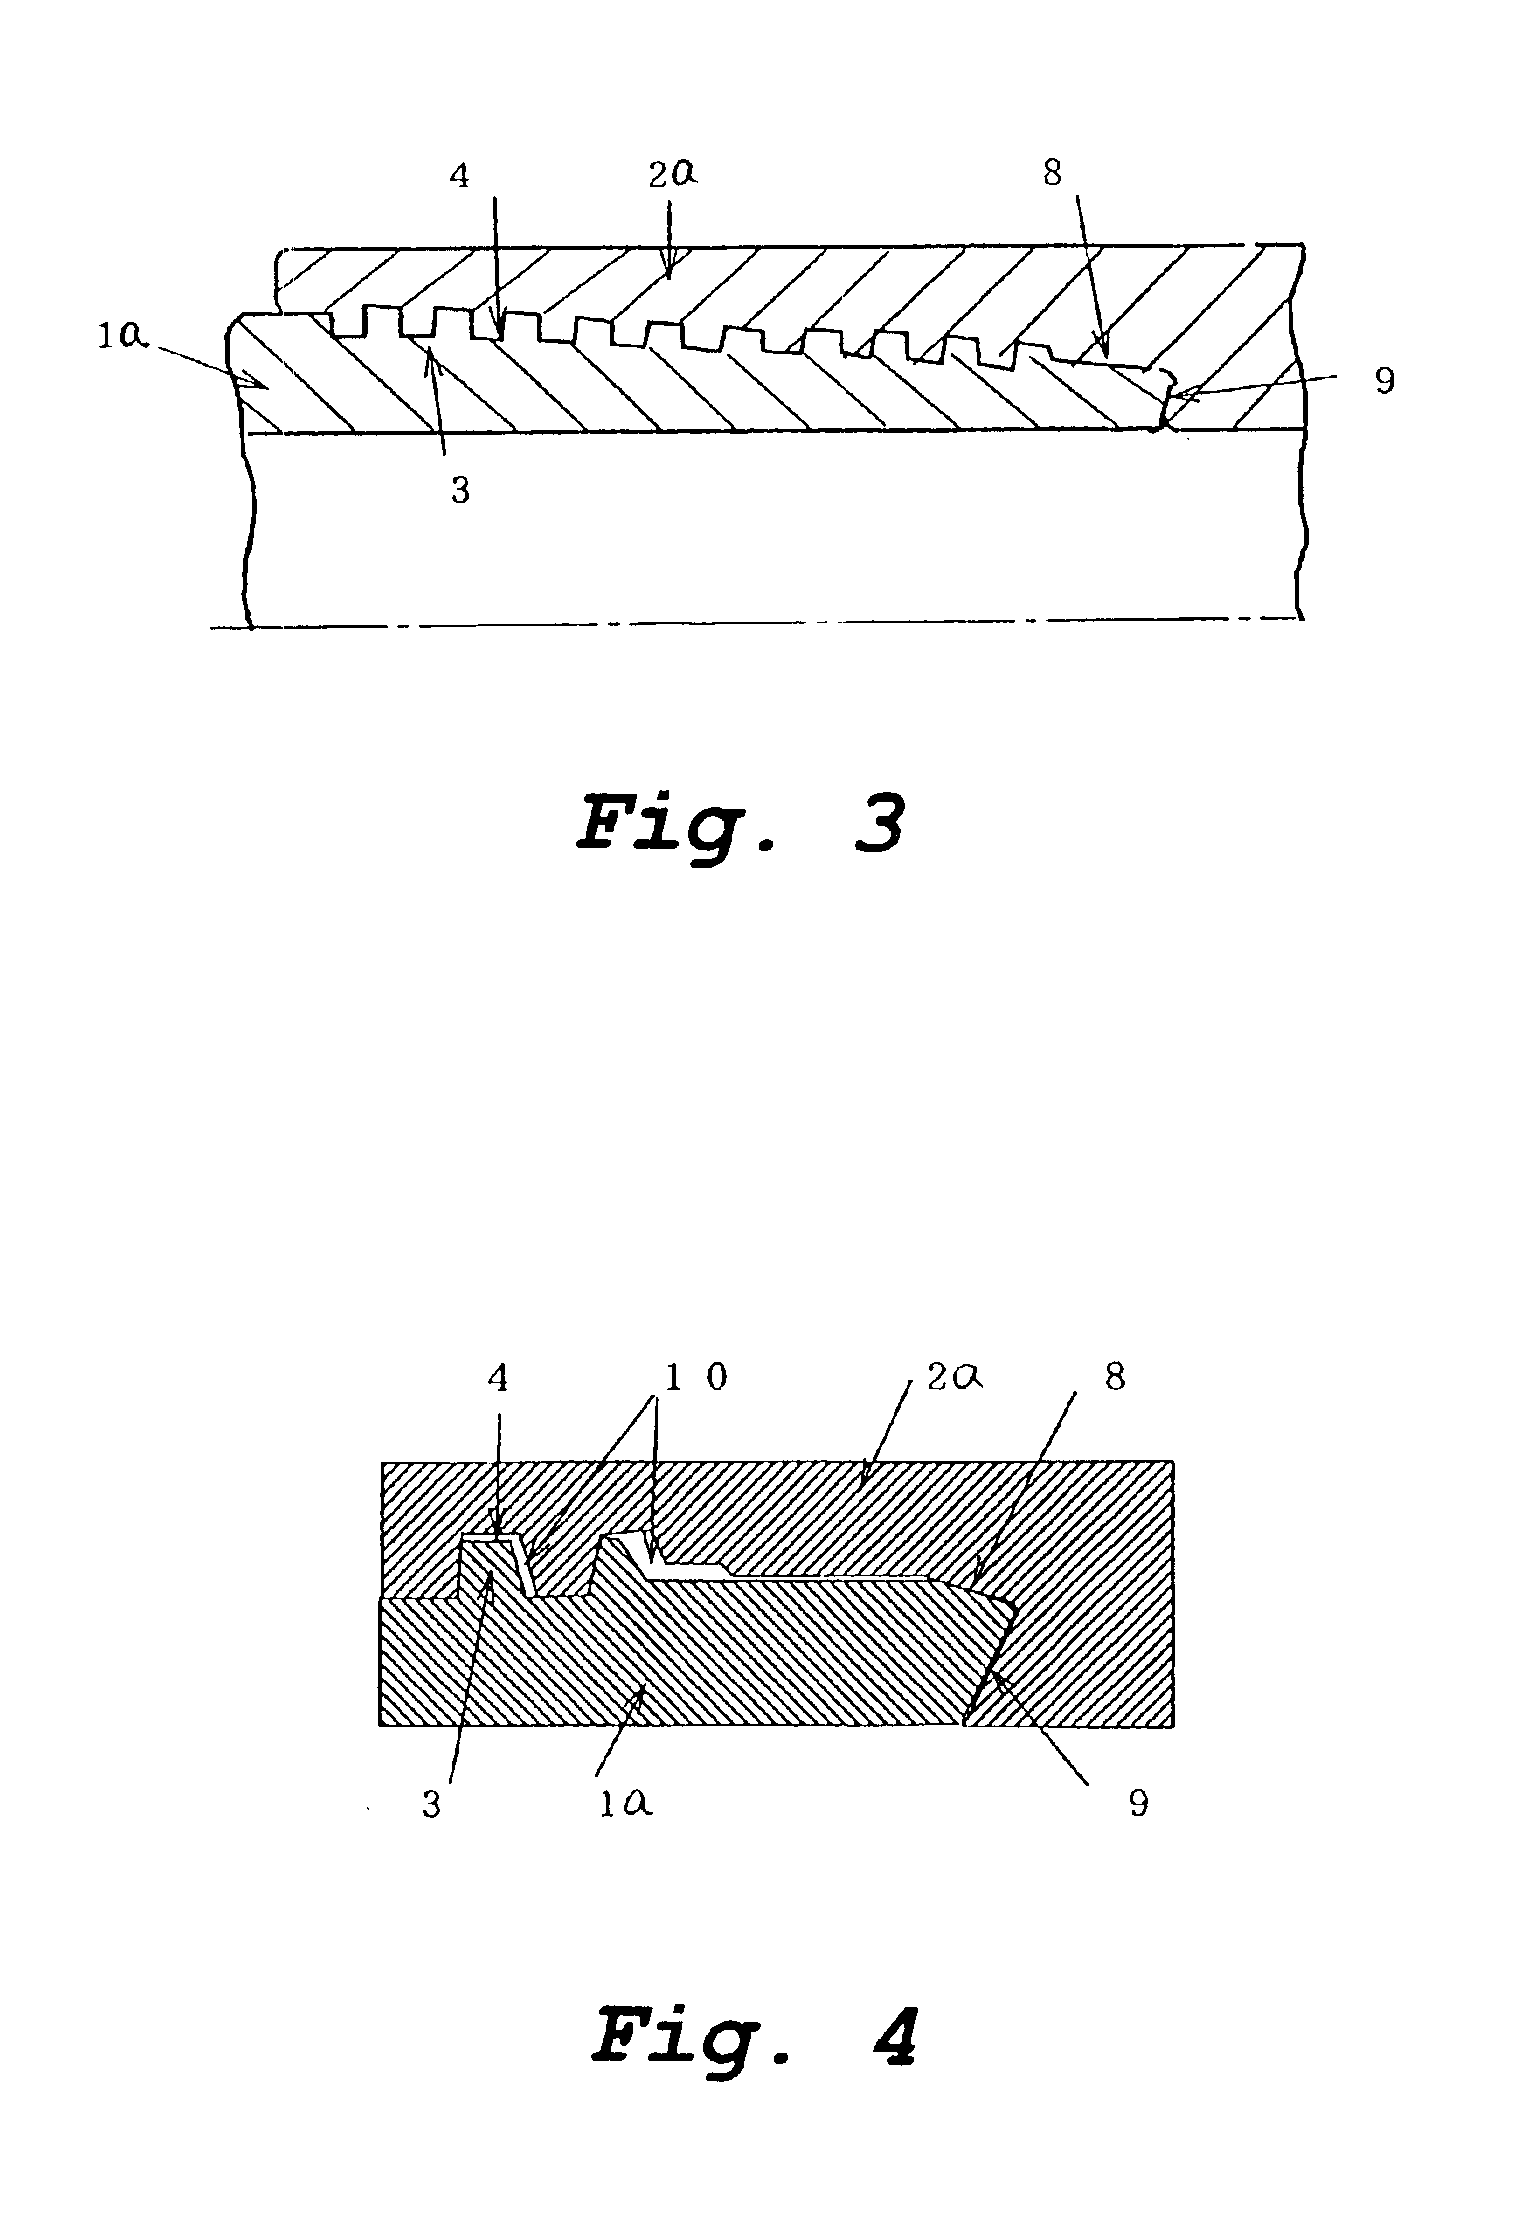 Lubricating coating composition suitable for lubrication of a threaded joint